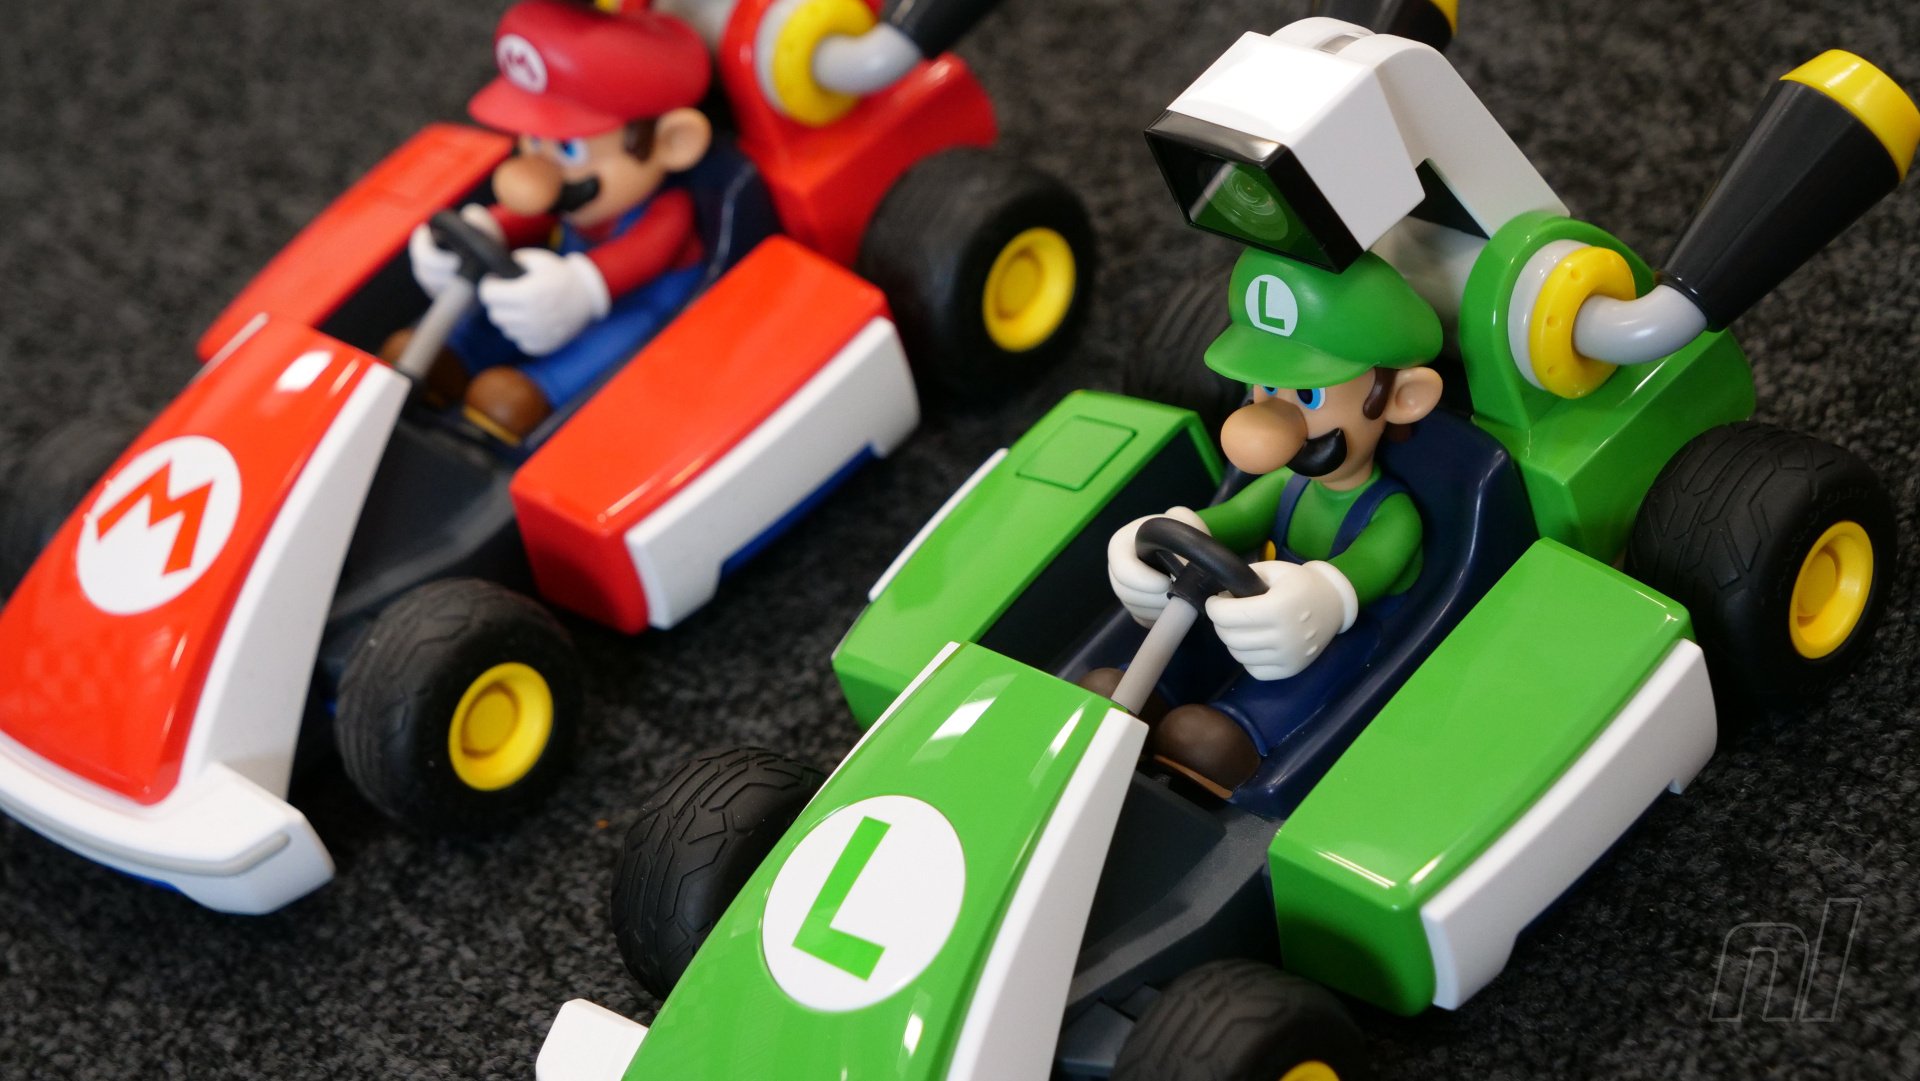 Mario Kart Live: Home Circuit Review - Innovative And Fun